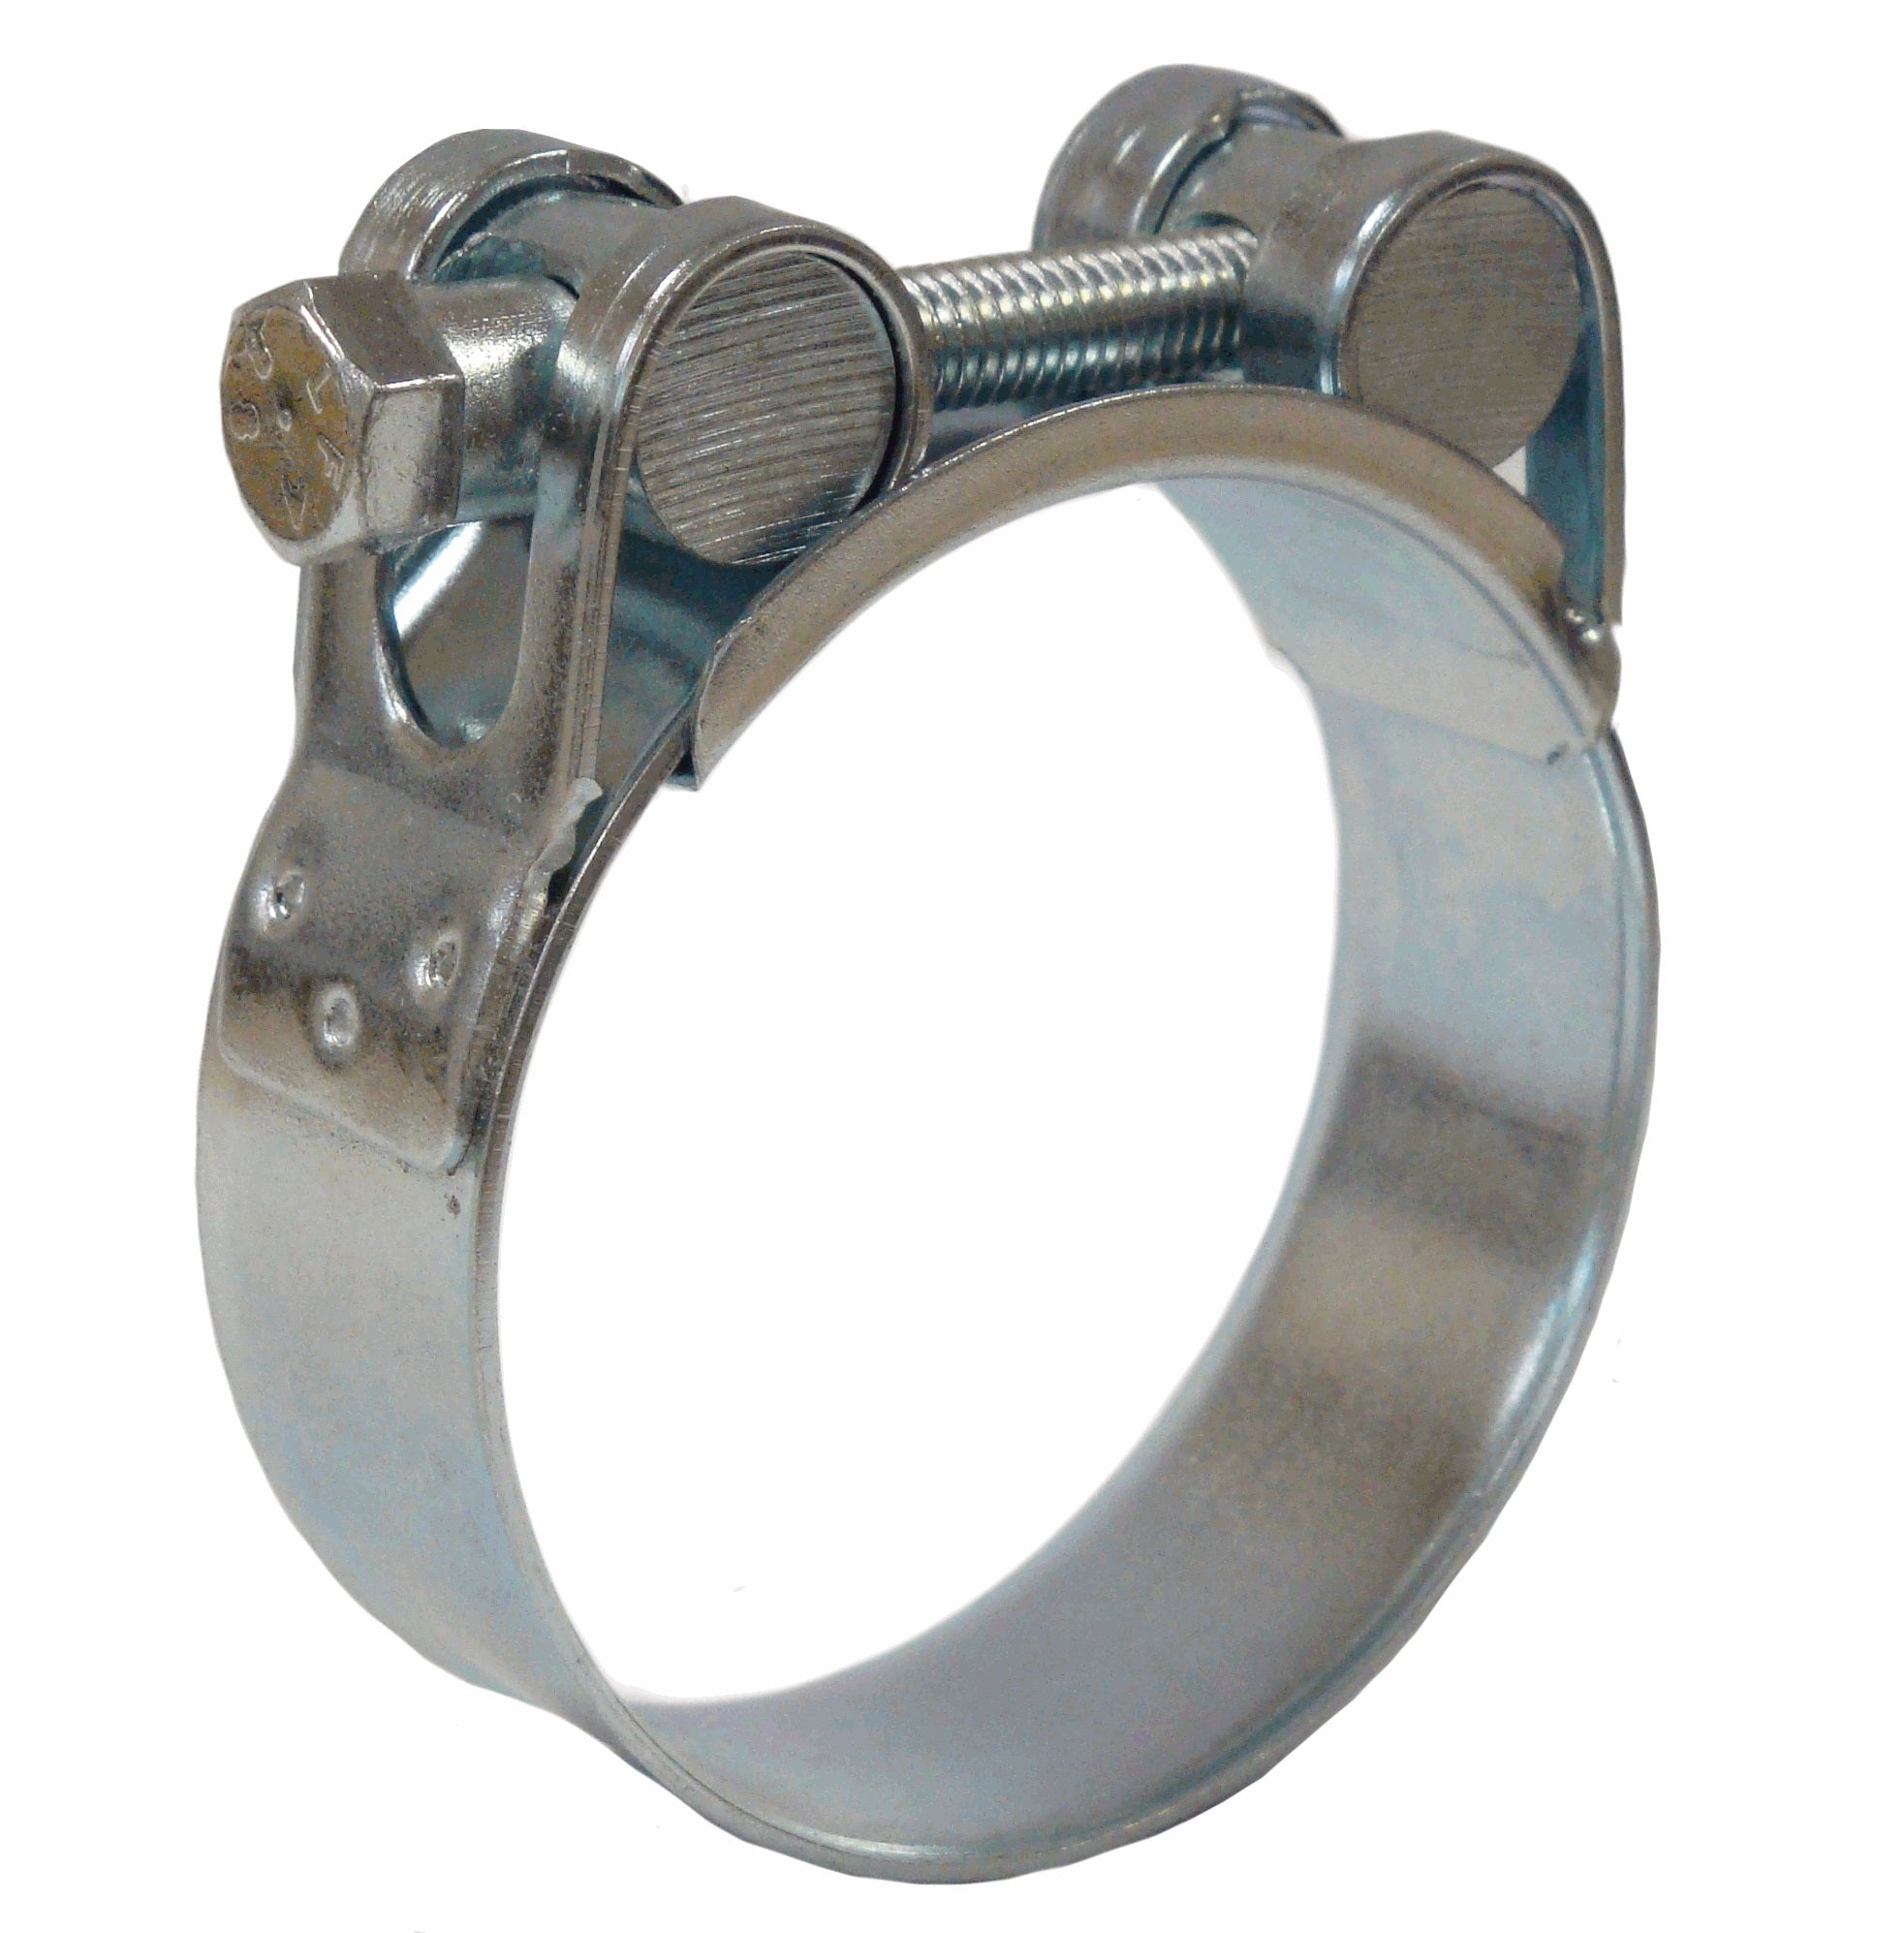 Jubilee® Superclamp 98-103mm 316 Stainless Steel